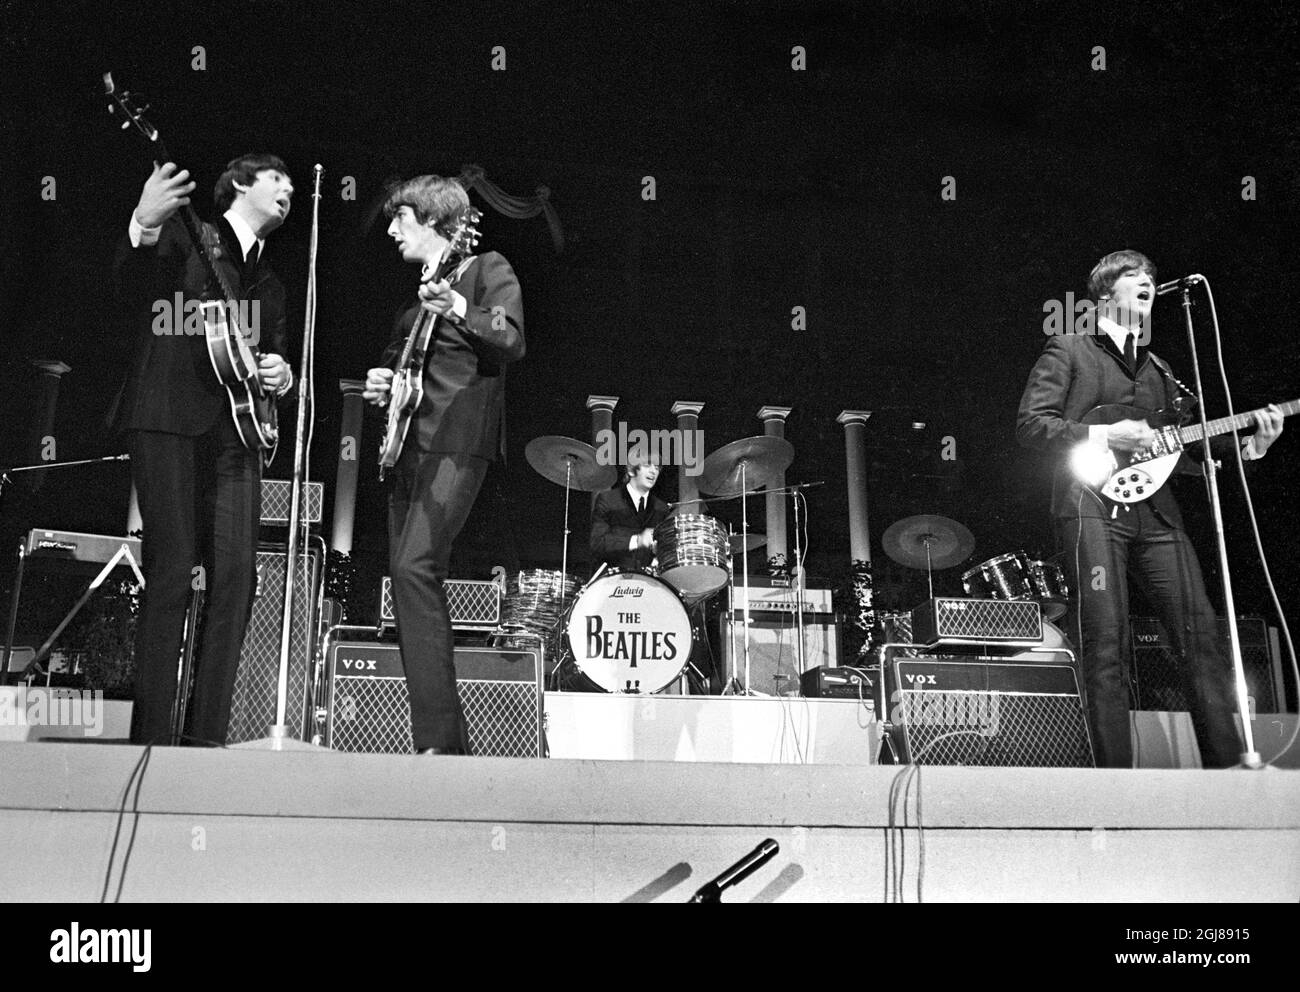 STOCKHOLM 1964-07-28 *FOR YOUR FILES* Paul McCartney, George Harrison Ringo Starr and John Lennon of the Beatles are seen during a concert at the Johanneshov Ice Stadium in Stockholm, Sweden, July 28, 1964 Foto: Folke Hellberg / DN / TT / Kod: 23 **OUT SWEDEN OUT**  Stock Photo